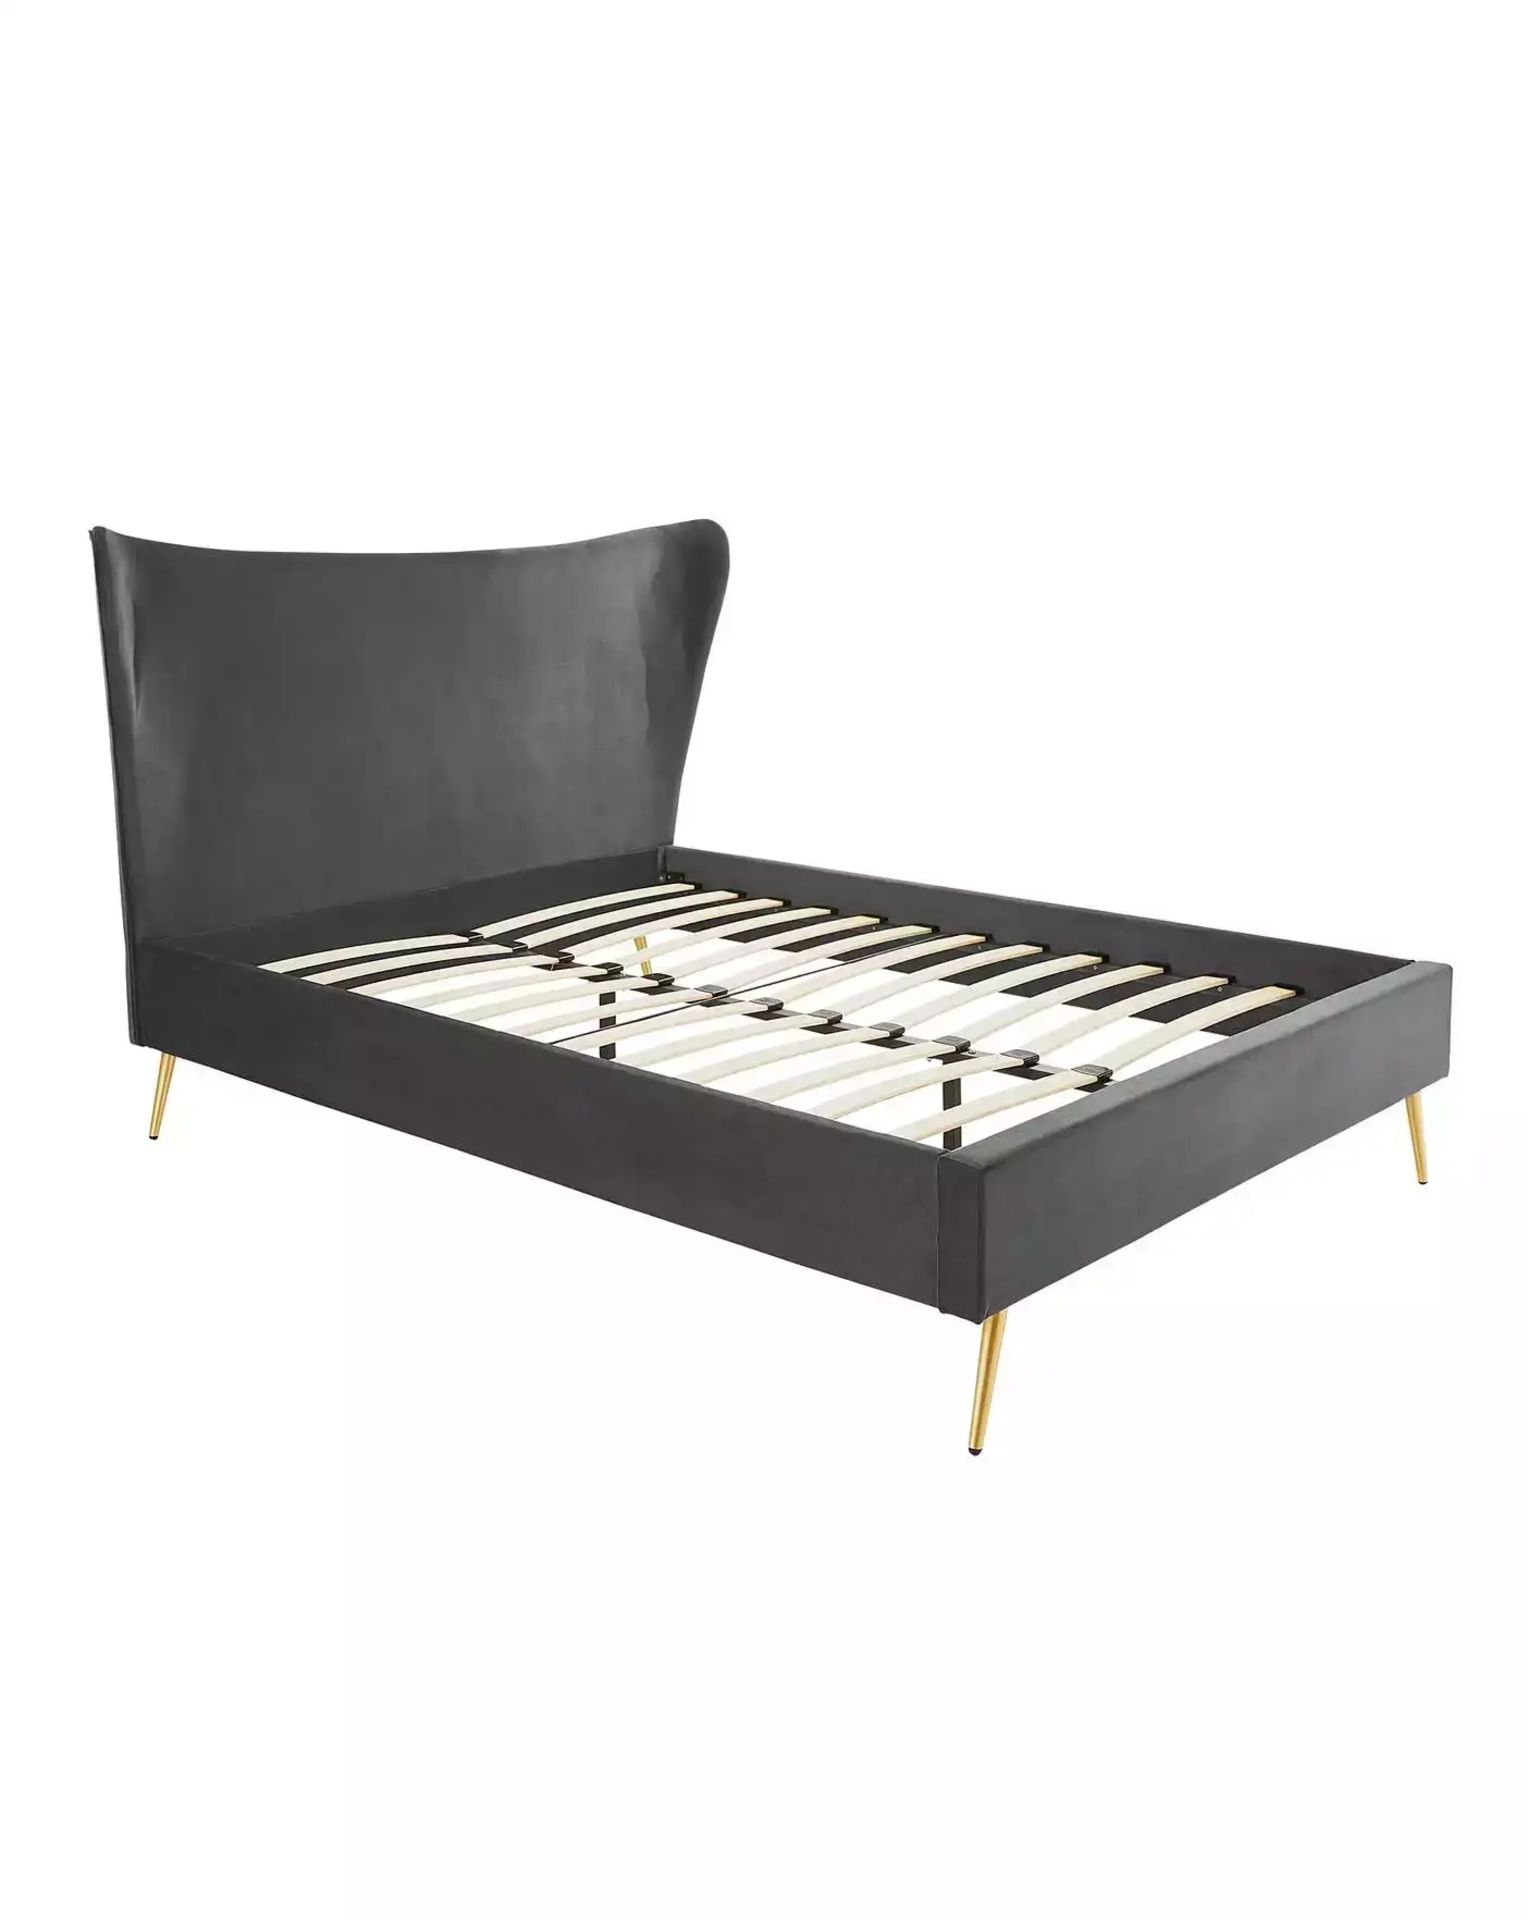 TRADE PALLET TO CONTAIN 4x BRAND NEW MARKLE Velvet KINGSIZE Bed. CHARCOAL. RRP £449 EACH. The Markle - Image 4 of 4